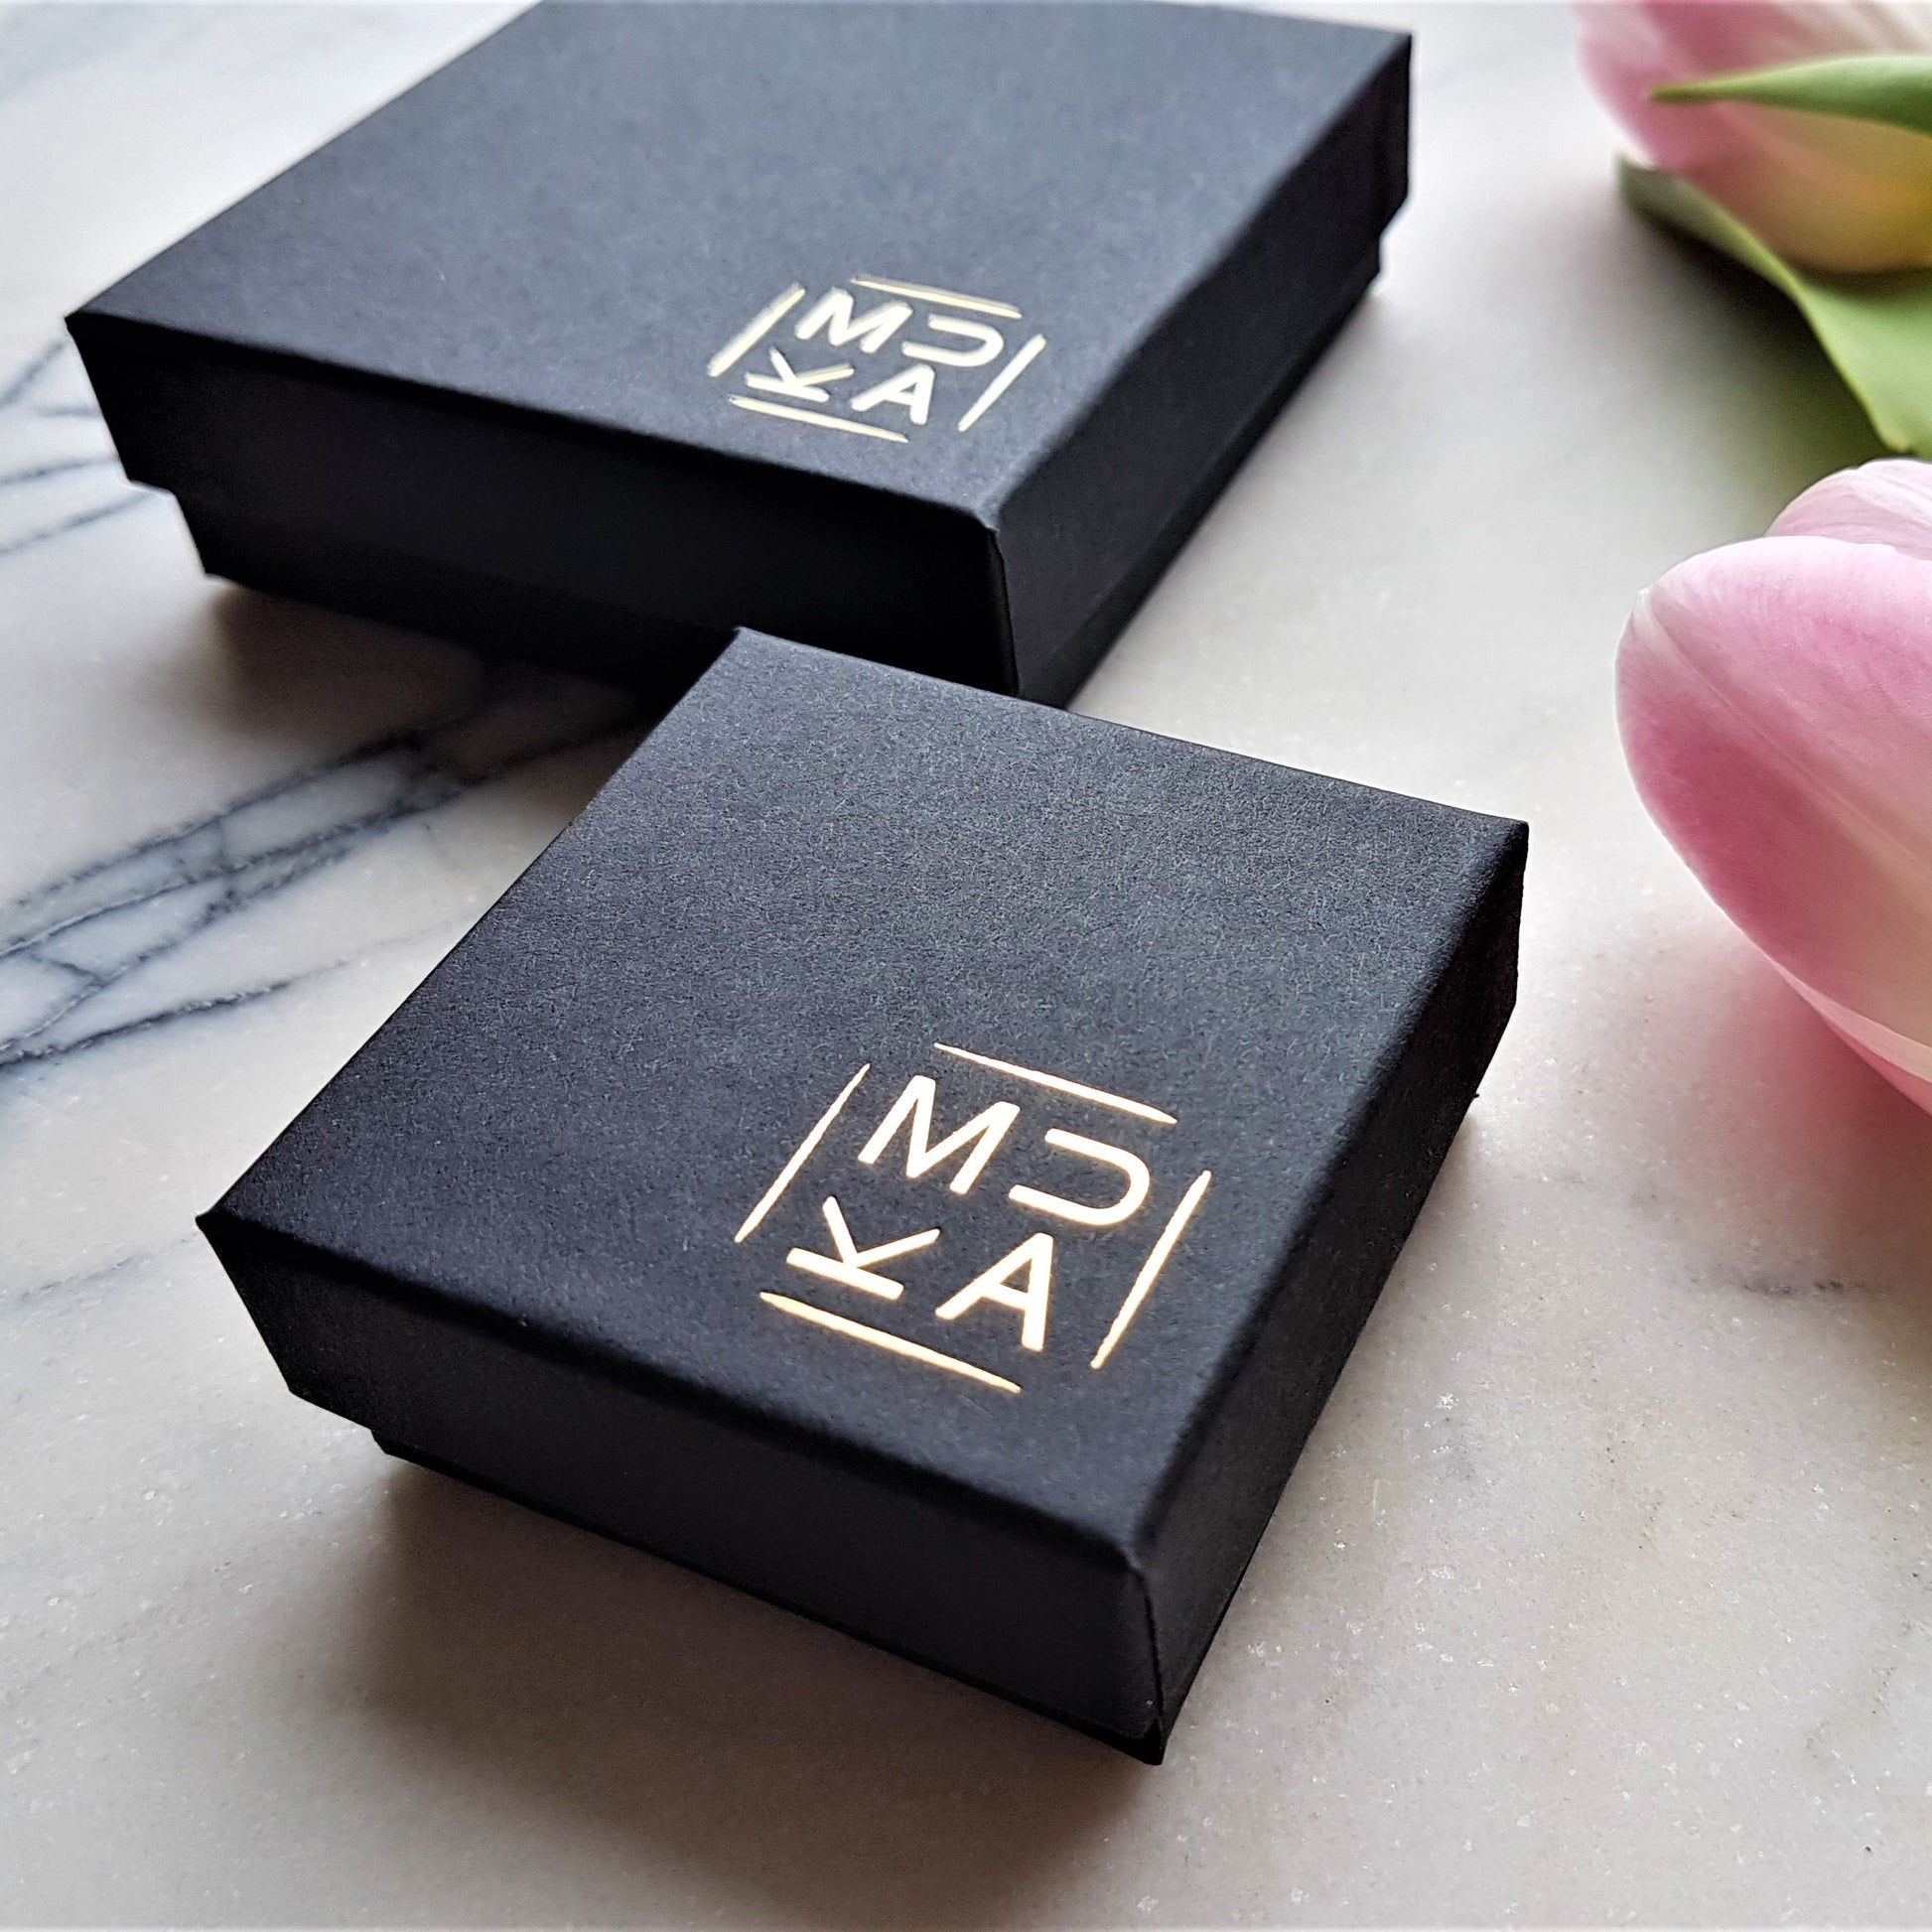 Image of MUKA branded gift boxes that come with earrings.  Matt black FSC certified cardboard boxes with MUKA logo embossed in gold in bottom right corner